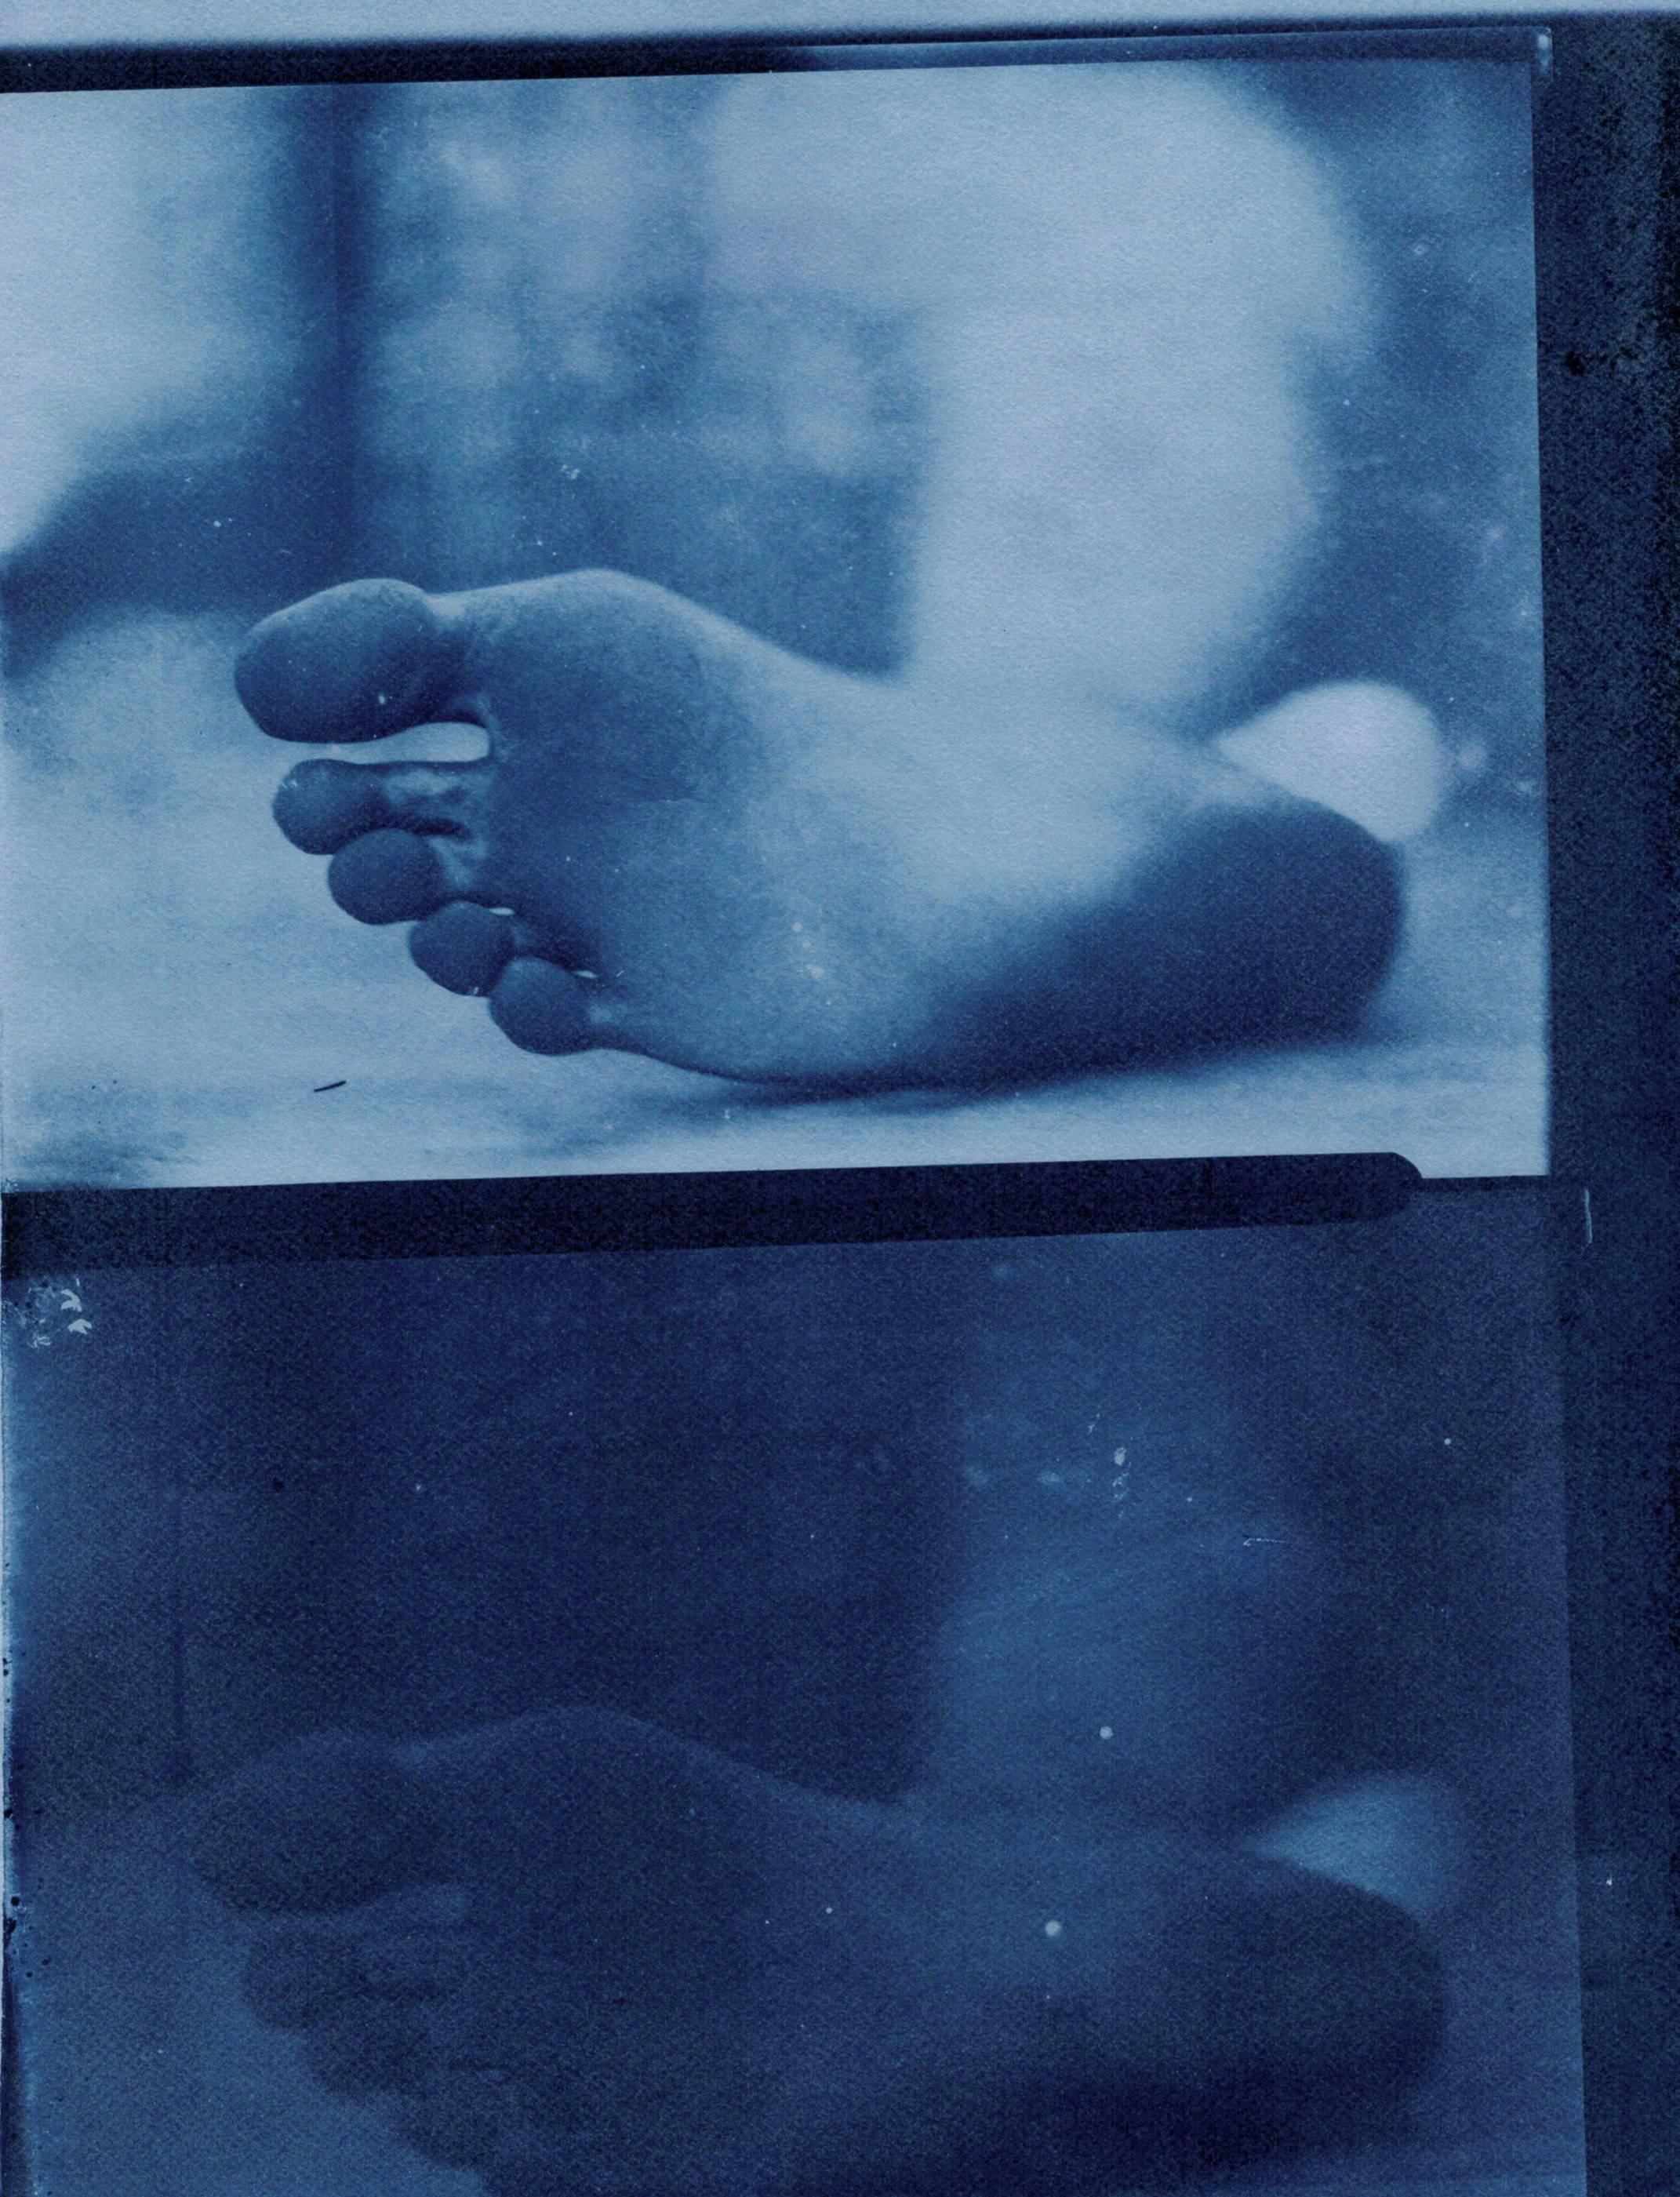 Hal Hirshorn makes 21st century photographs using 19th century materials and methods. Specifically, salt prints, a technique invented by William Henry Fox Talbot in 1841. The intention however is not to recreate period facsimiles. Hirshorn creates